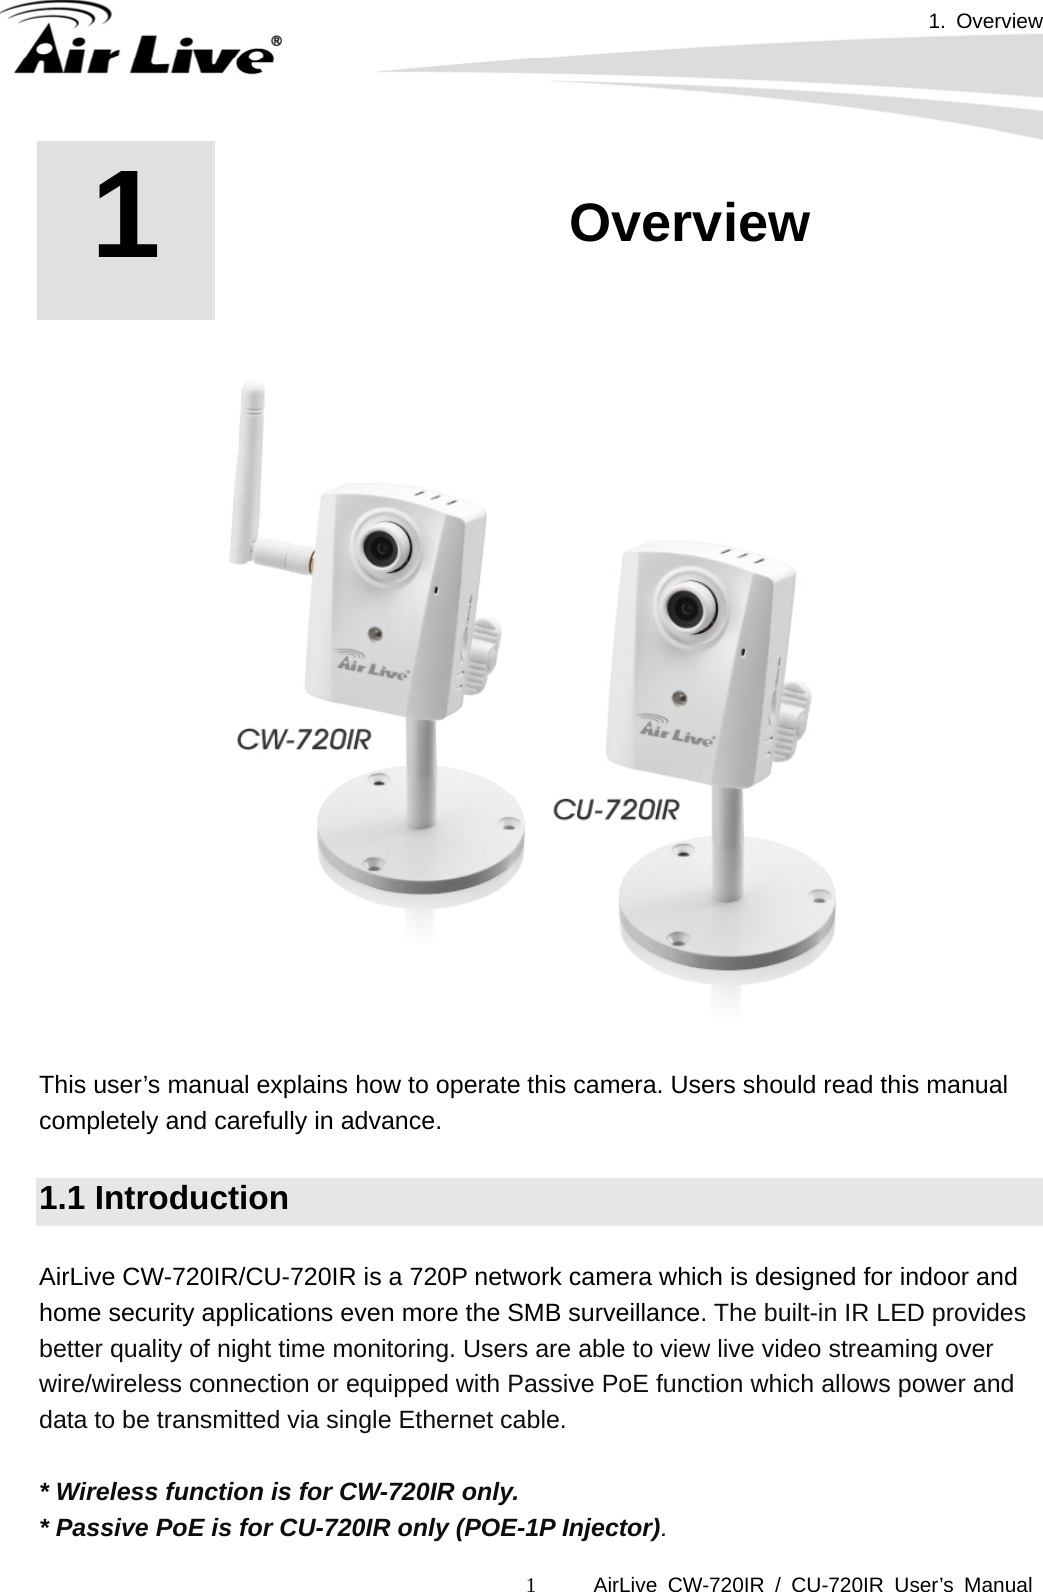 1. Overview AirLive CW-720IR / CU-720IR User’s Manual 1 1  1. Overview        This user’s manual explains how to operate this camera. Users should read this manual completely and carefully in advance.  1.1 Introduction  AirLive CW-720IR/CU-720IR is a 720P network camera which is designed for indoor and home security applications even more the SMB surveillance. The built-in IR LED provides better quality of night time monitoring. Users are able to view live video streaming over wire/wireless connection or equipped with Passive PoE function which allows power and data to be transmitted via single Ethernet cable.  * Wireless function is for CW-720IR only. * Passive PoE is for CU-720IR only (POE-1P Injector). 